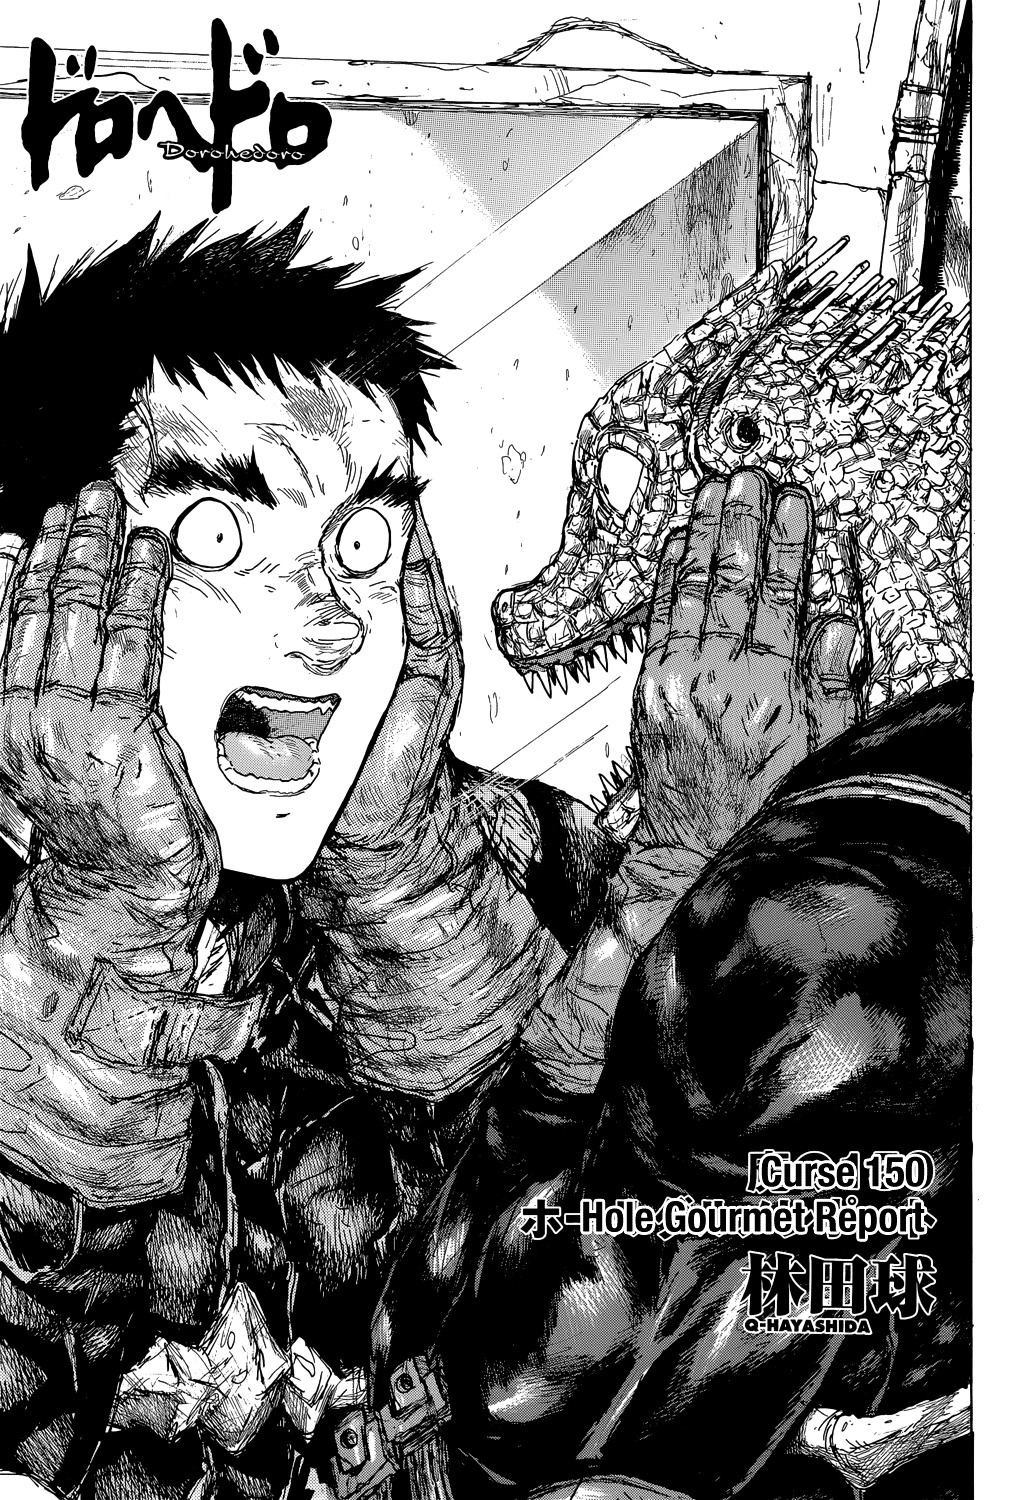 Dorohedoro Chapter 150 : Hole Gourmet Report - Picture 3